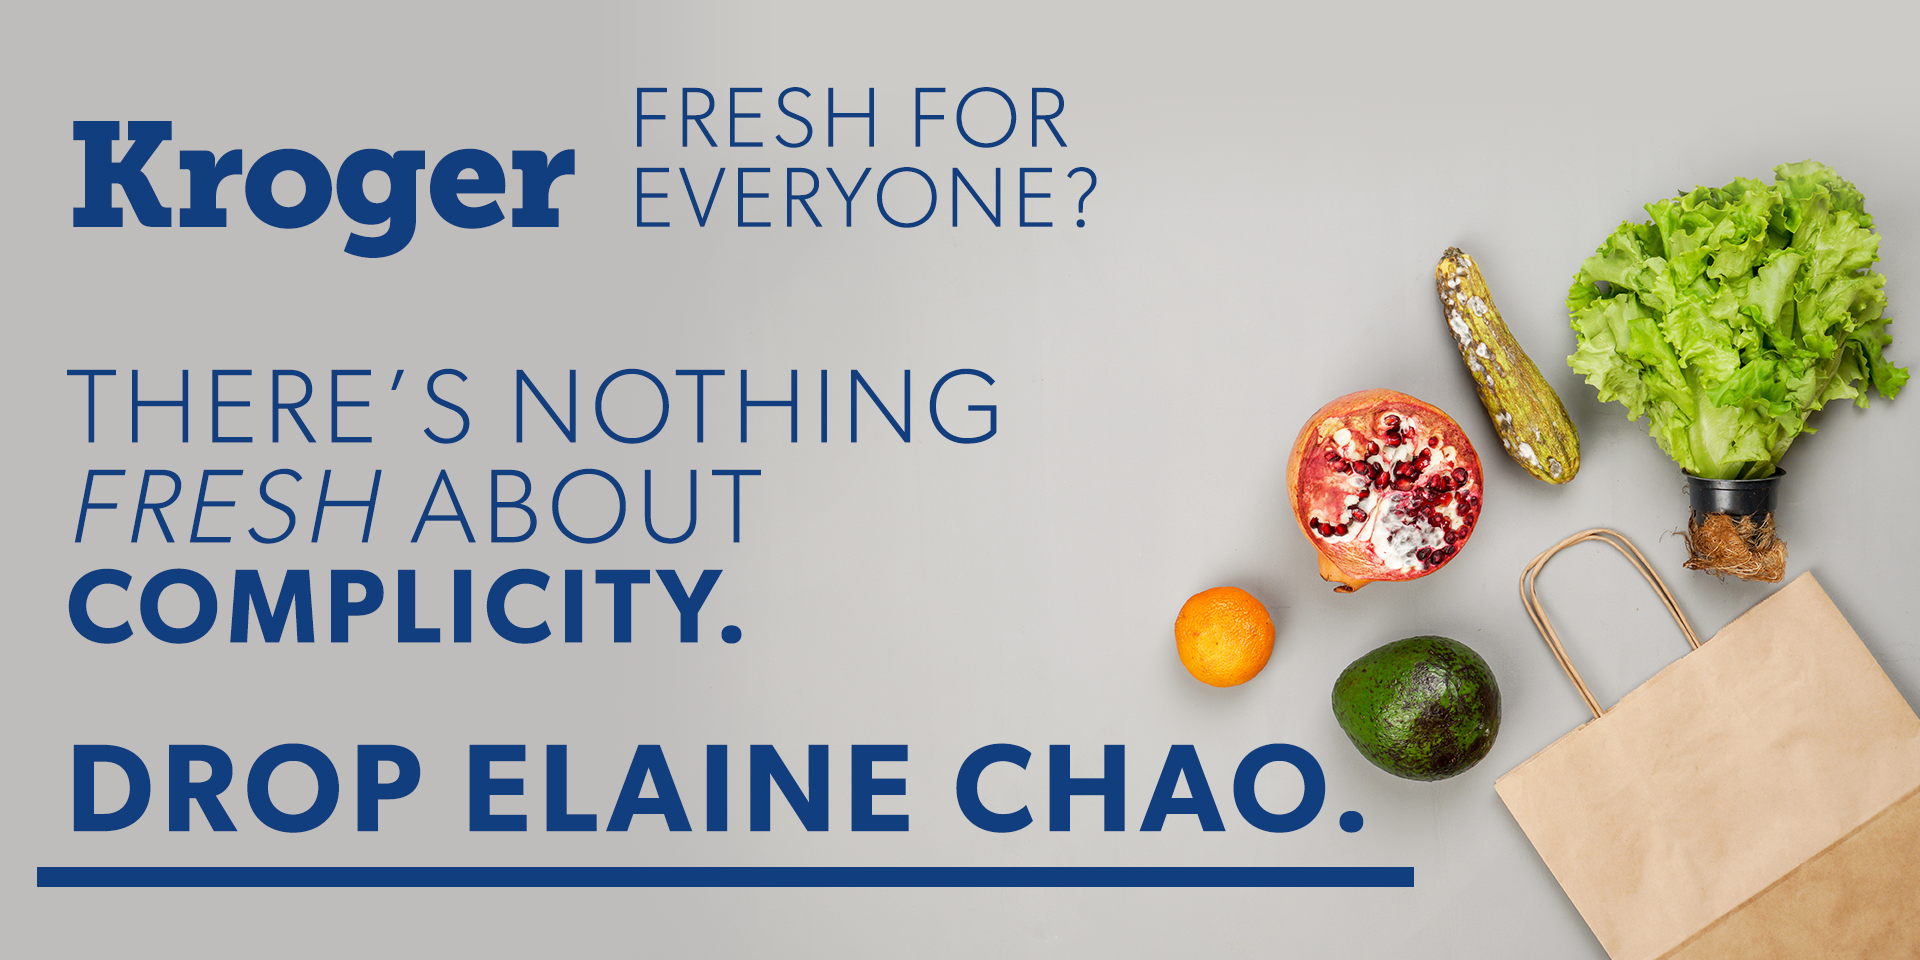 Digital Billboard raising awareness of Kroger's support of Elaine Chao. Featuring spoiled food imagery. 